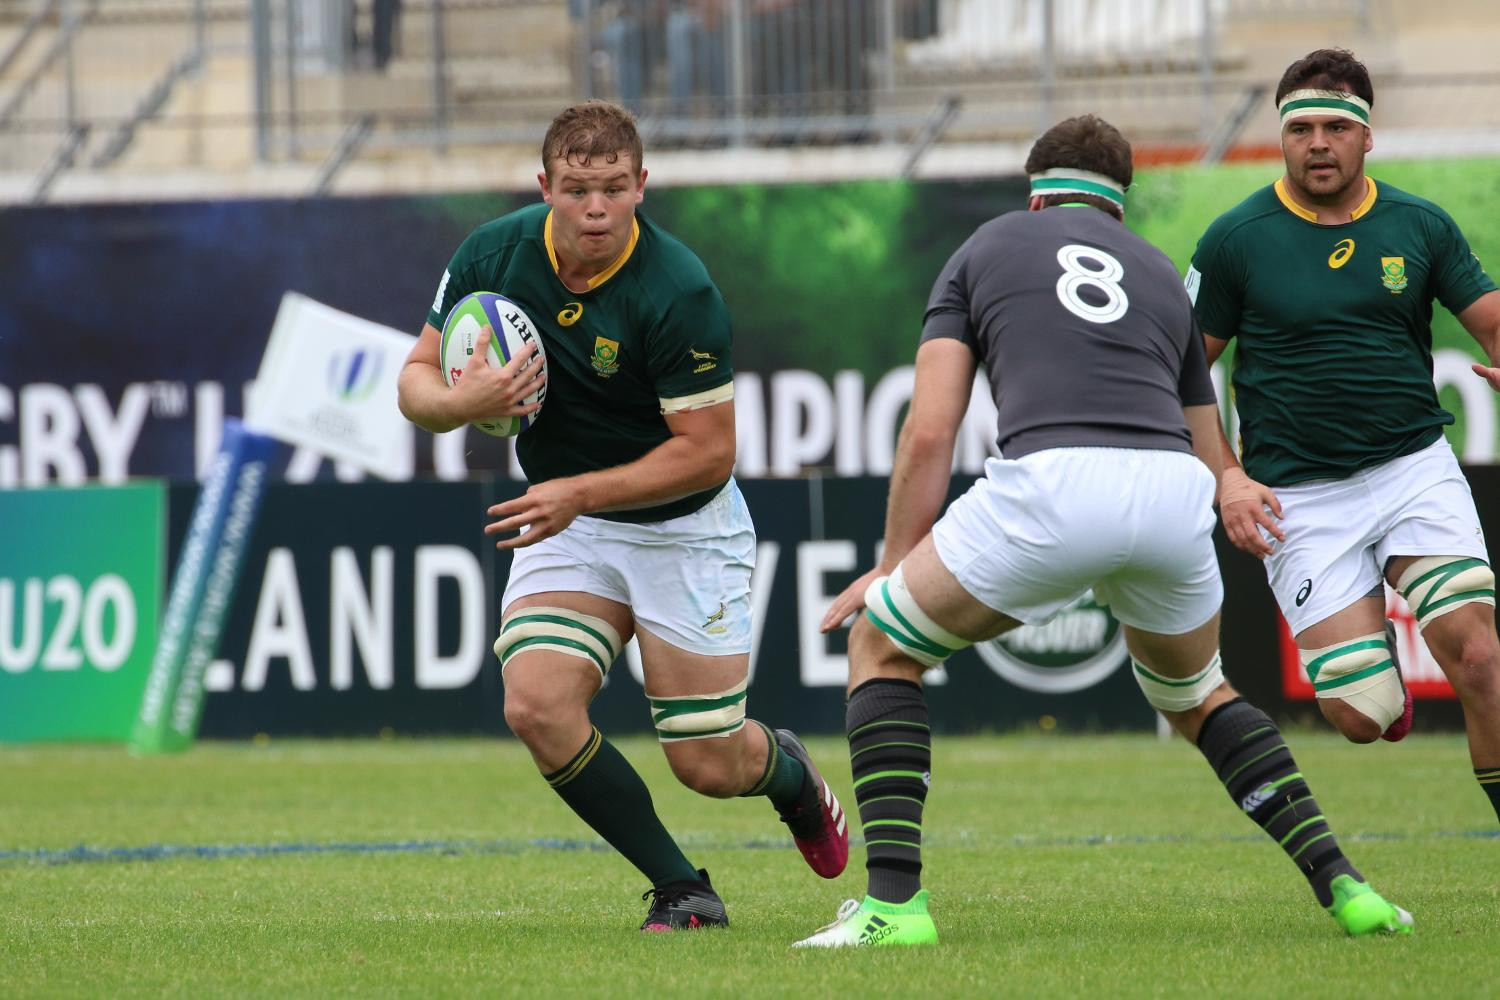 South Africa beat Ireland in other matches today ©World Rugby